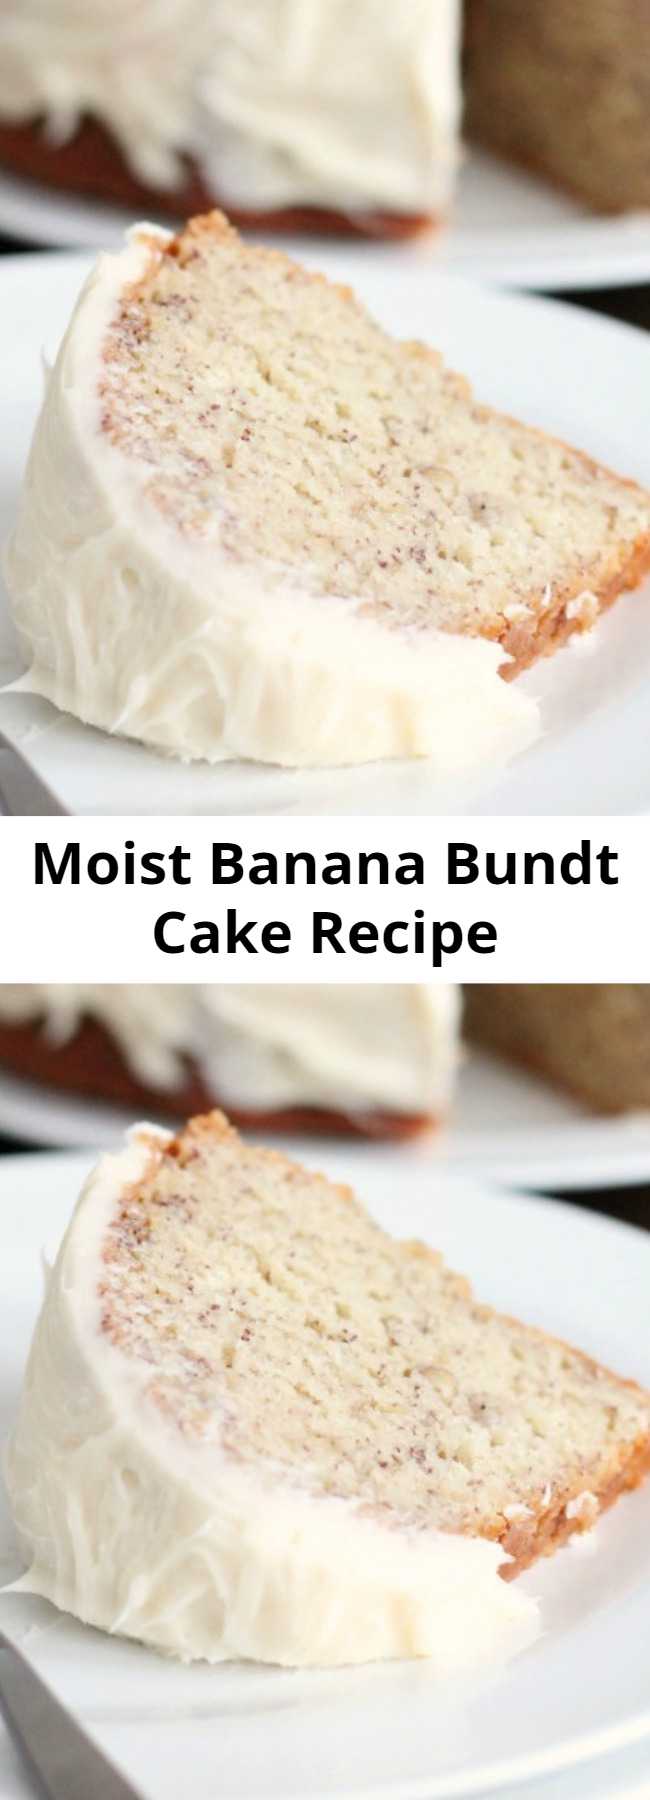 Moist Banana Bundt Cake Recipe - Exceptionally Moist and flavorful. A special "freezer trick" locks in the moisture. I like to serve the cake slightly chilled. And it just gets better and more moist each day. When possible, make it at least a day in advance of when you plan to serve it.